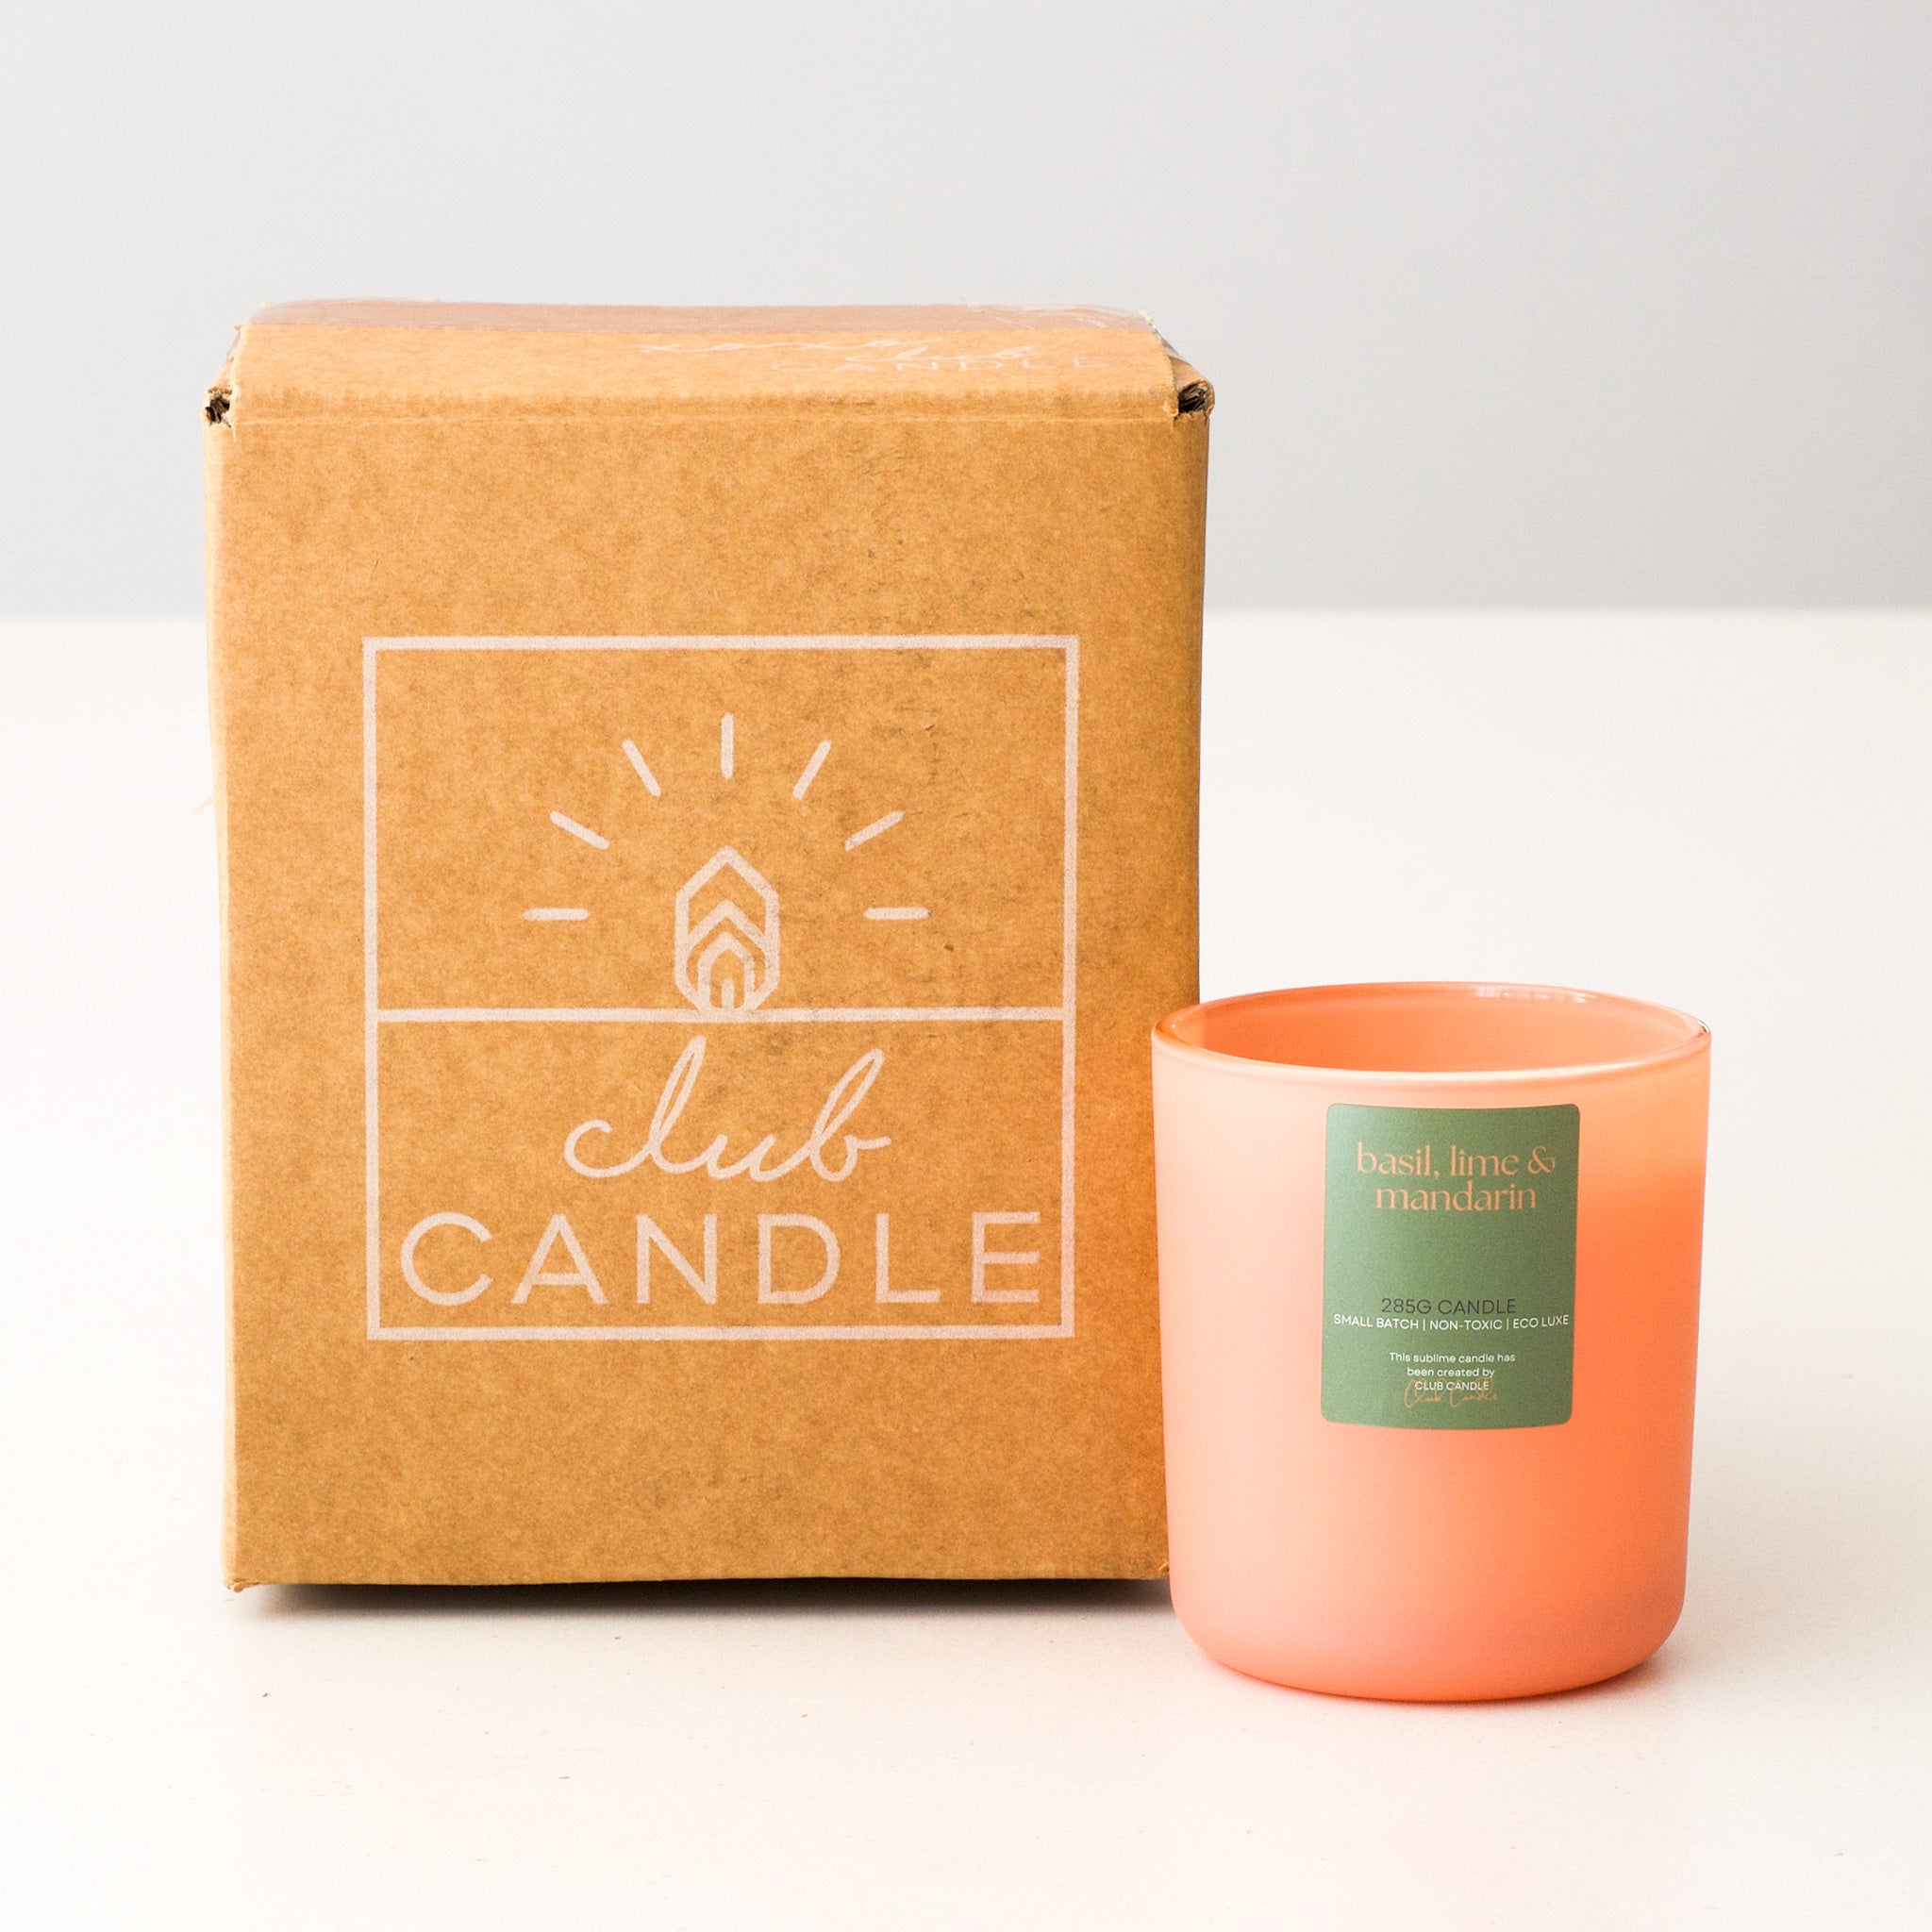 Candle of the Month - Basil, Lime & Mandarin